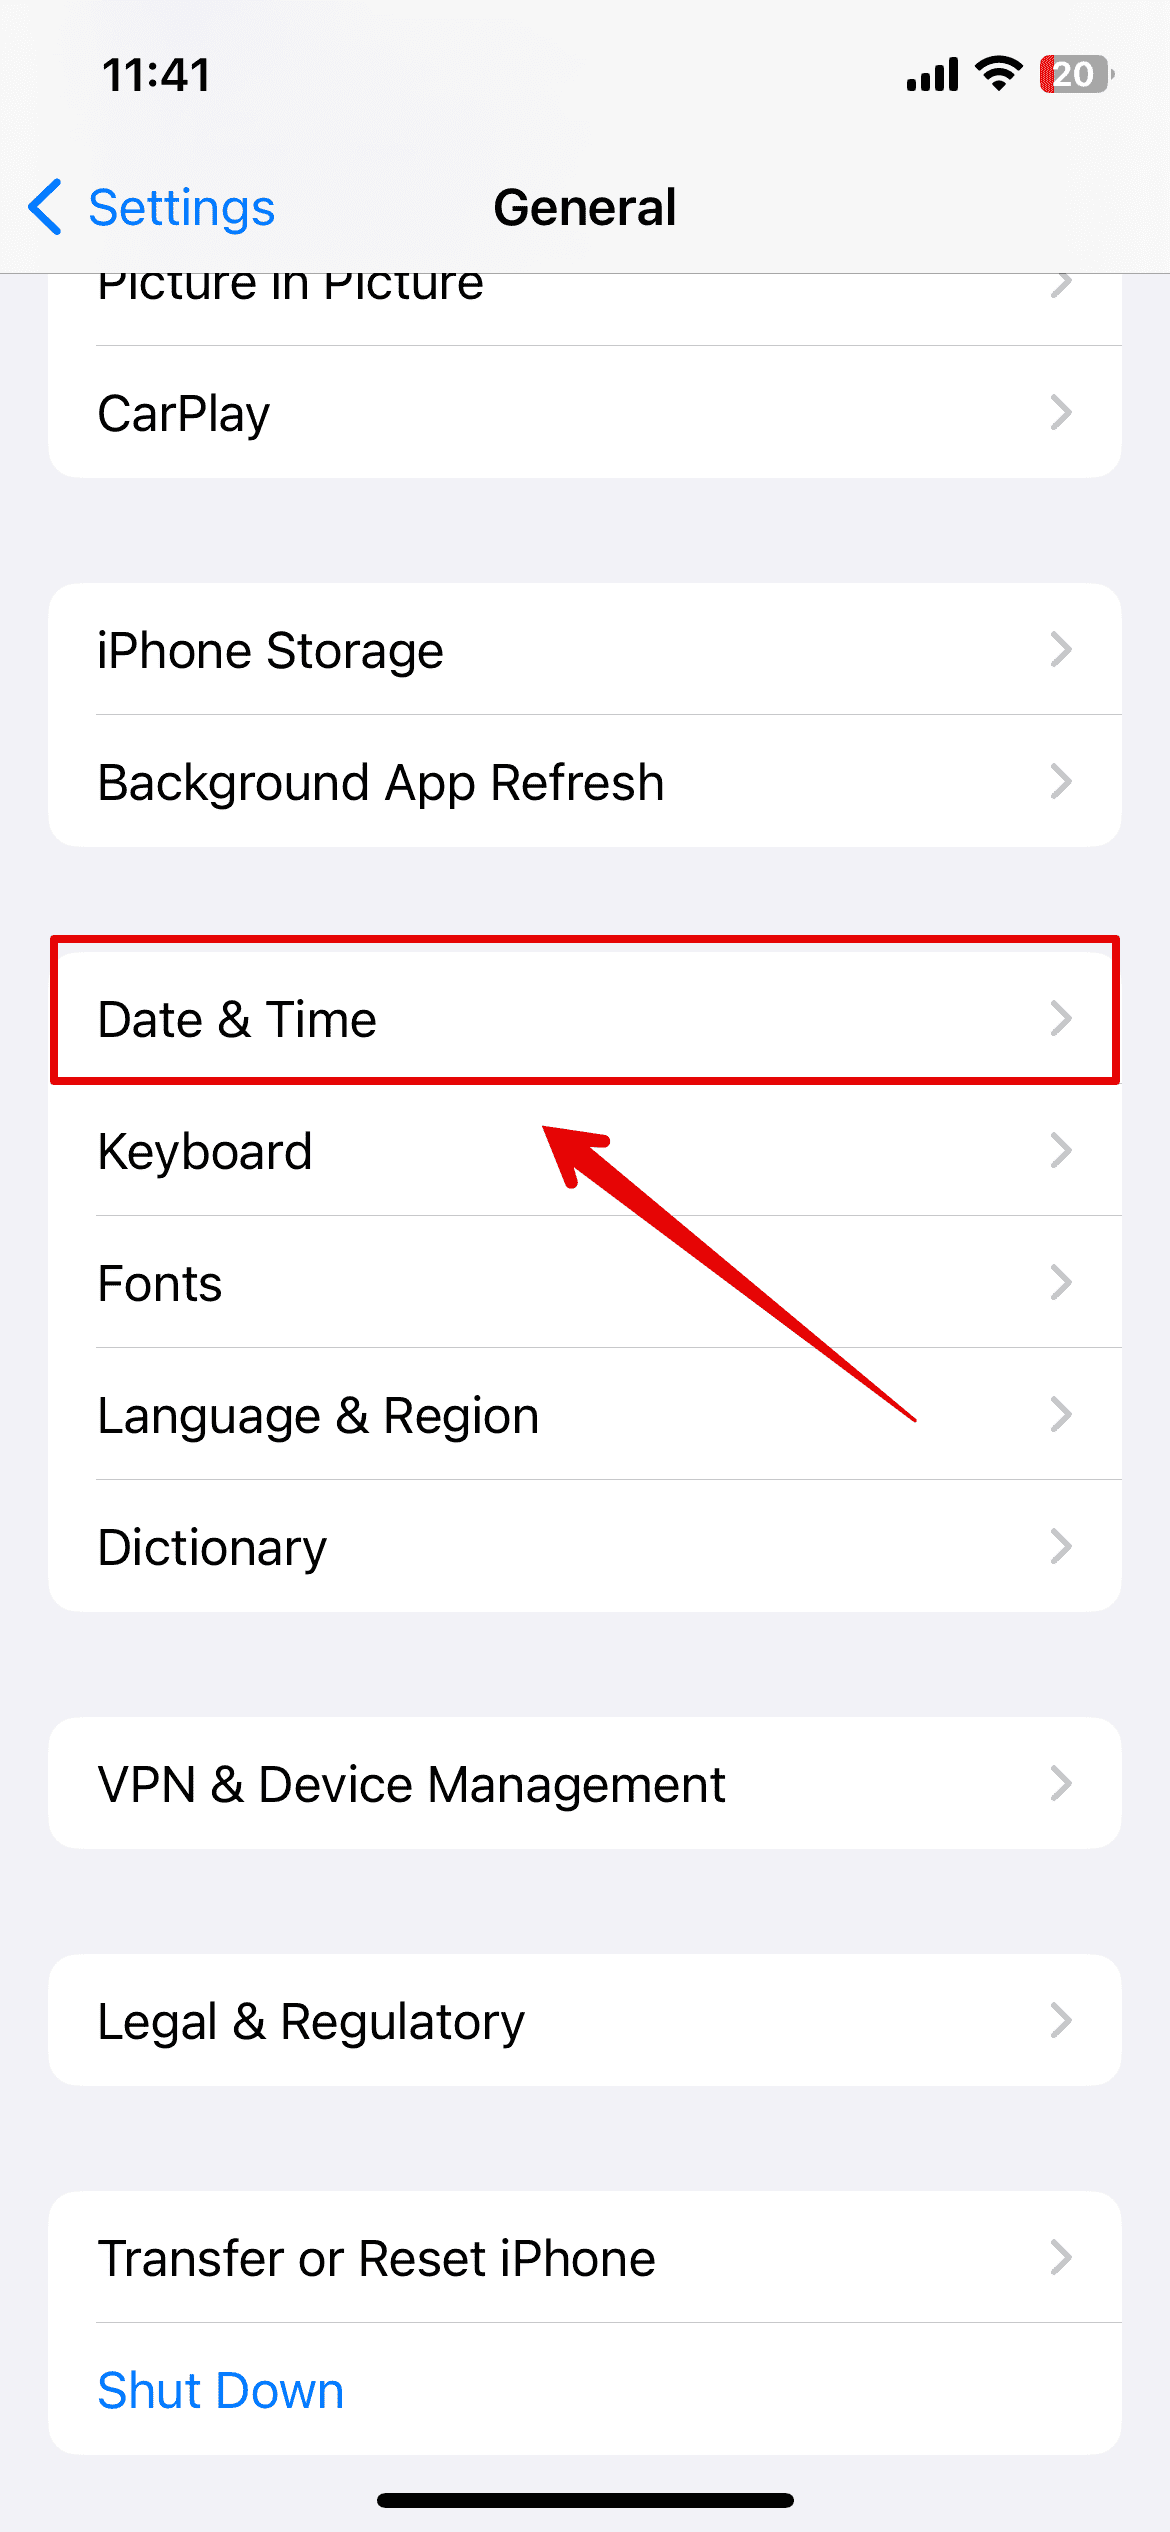 Tap on Date & Time settings